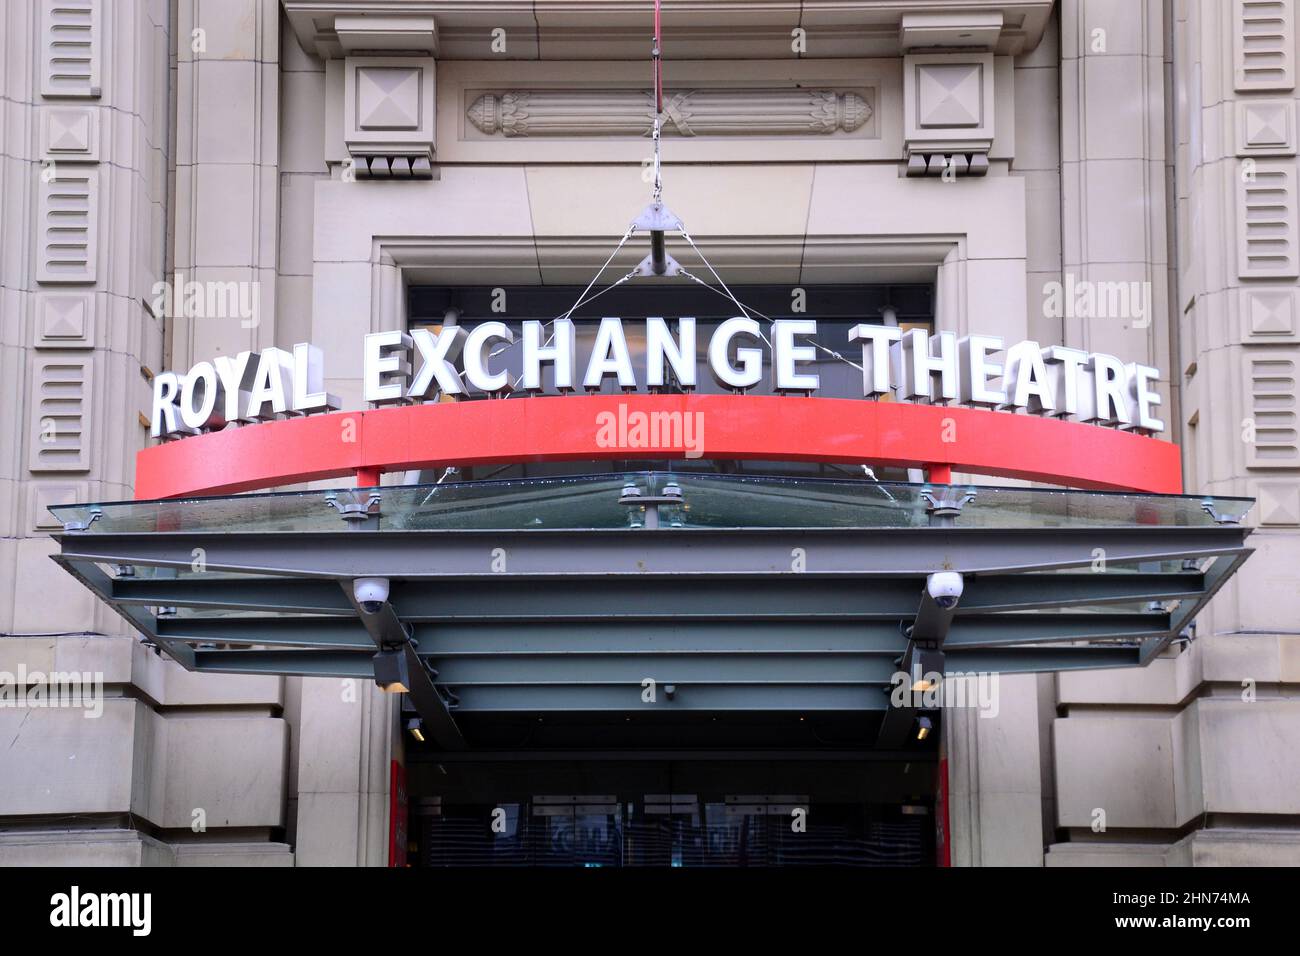 Exterior sign on the Royal Exchange Theatre, central Manchester, United Kingdom. Stock Photo